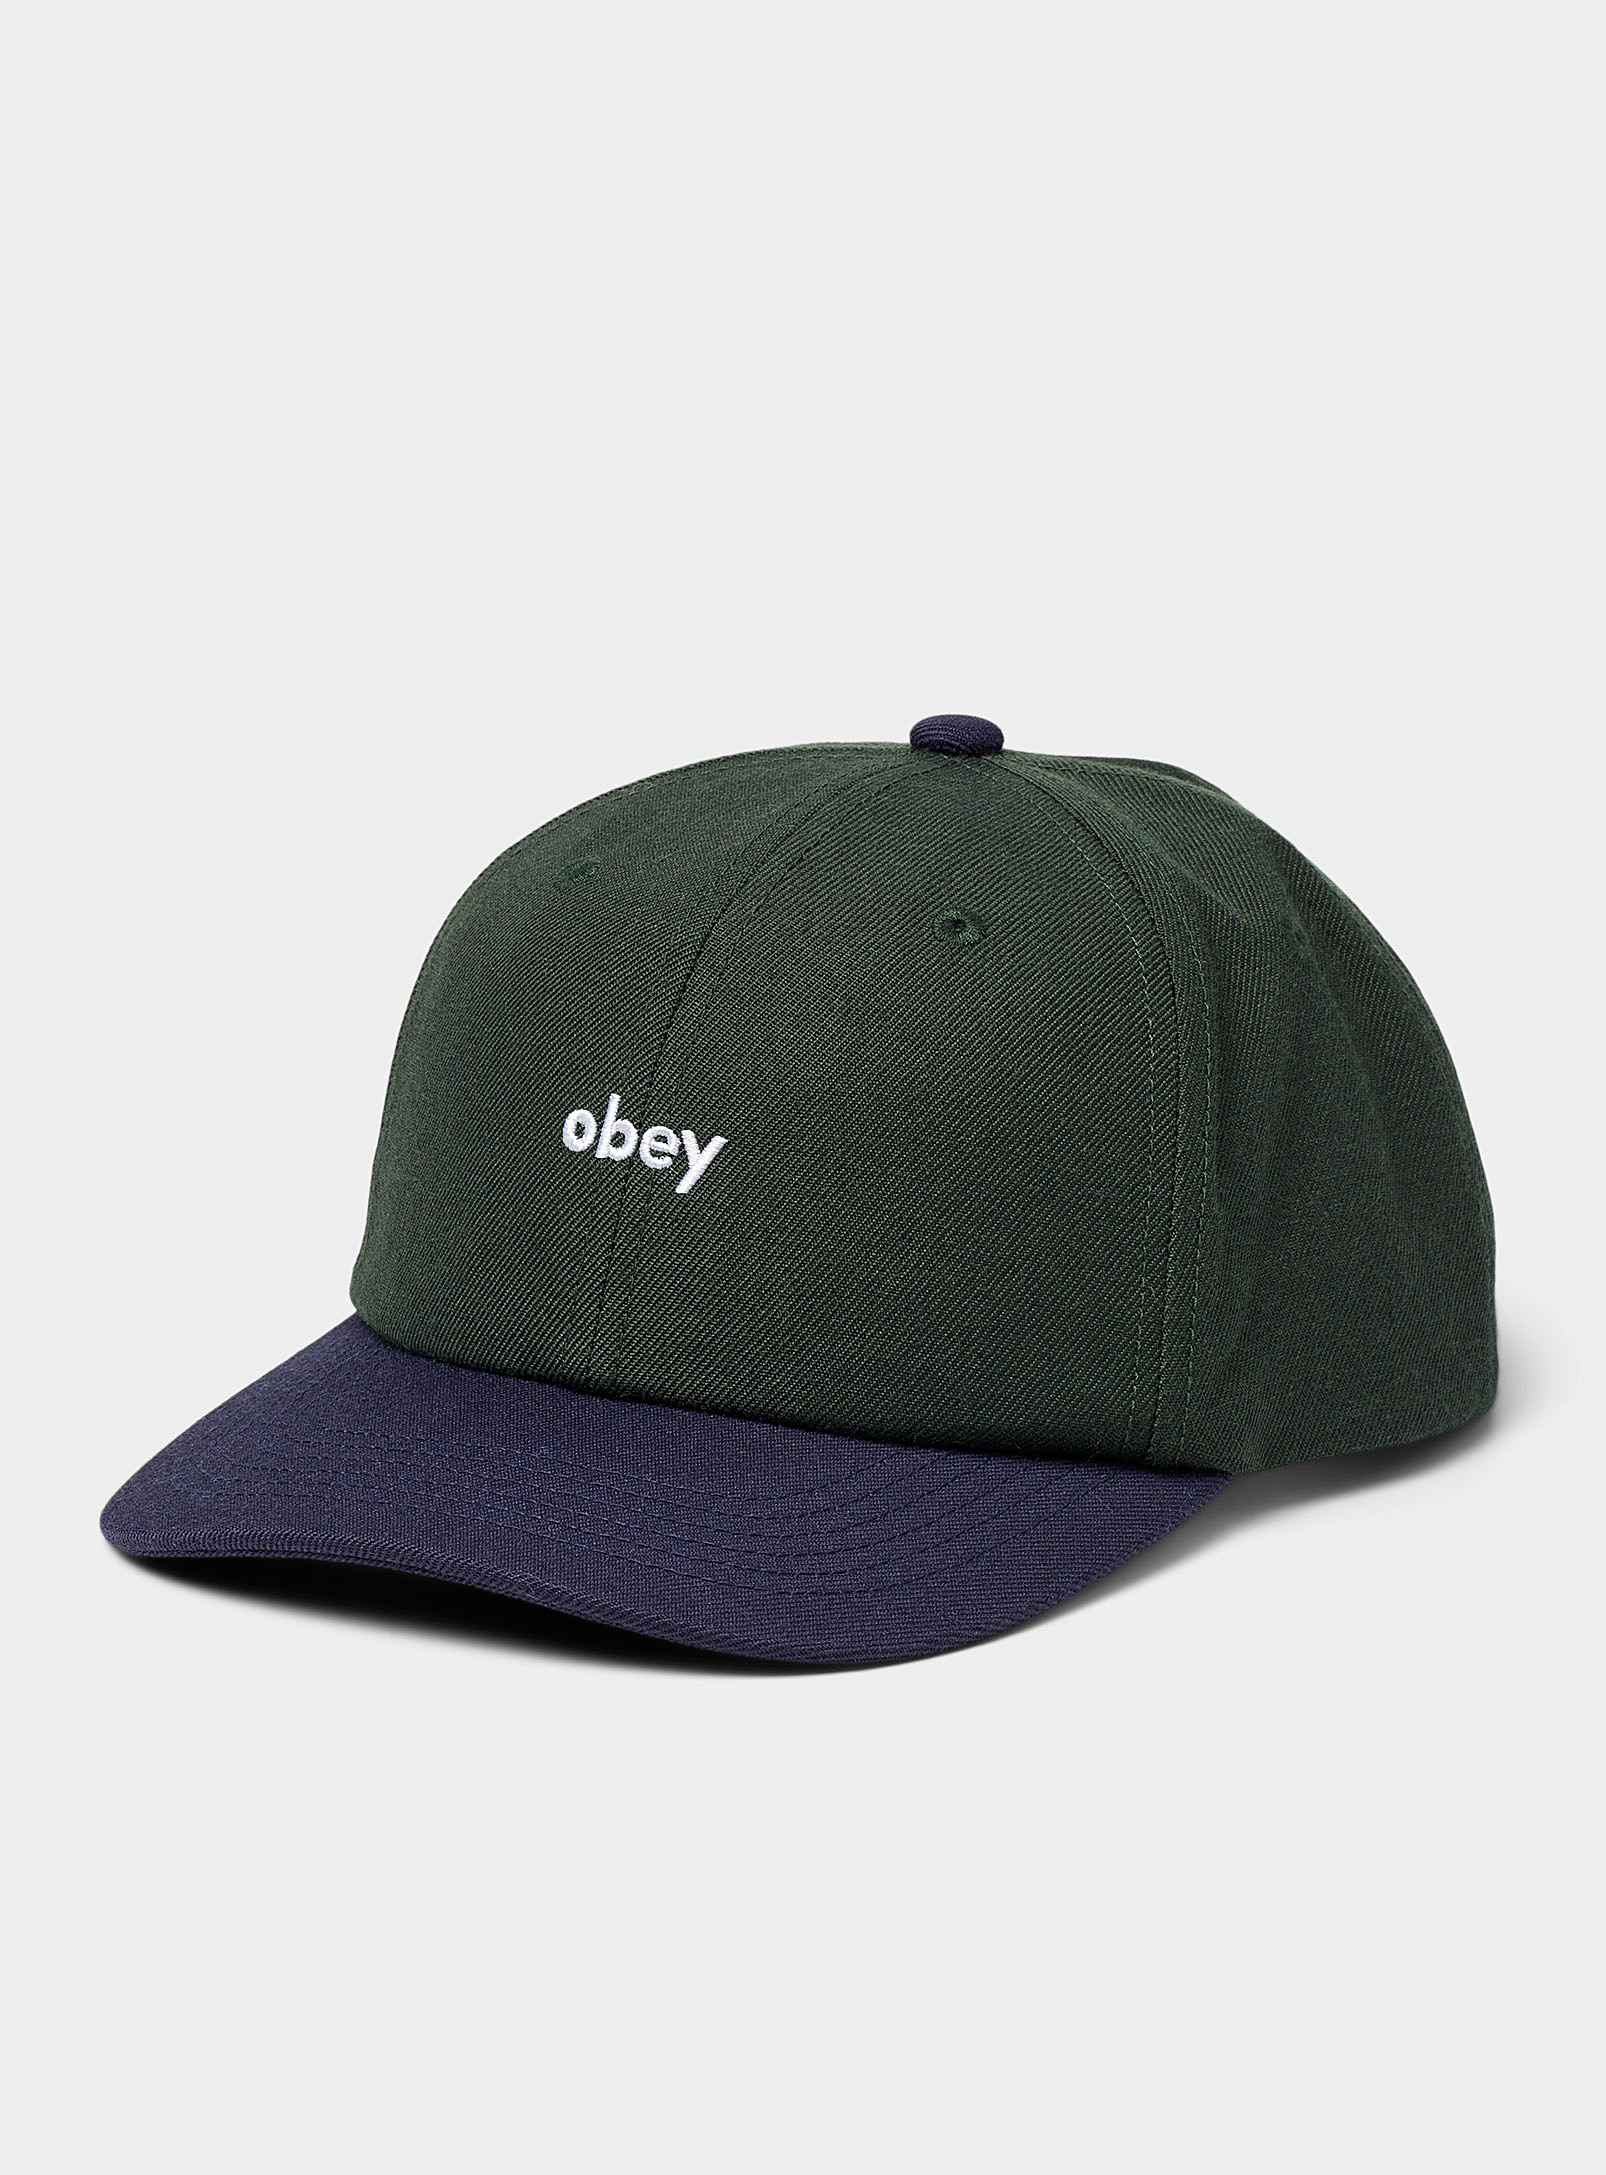 OBEY SMALL LOGO TWO-TONE CAP